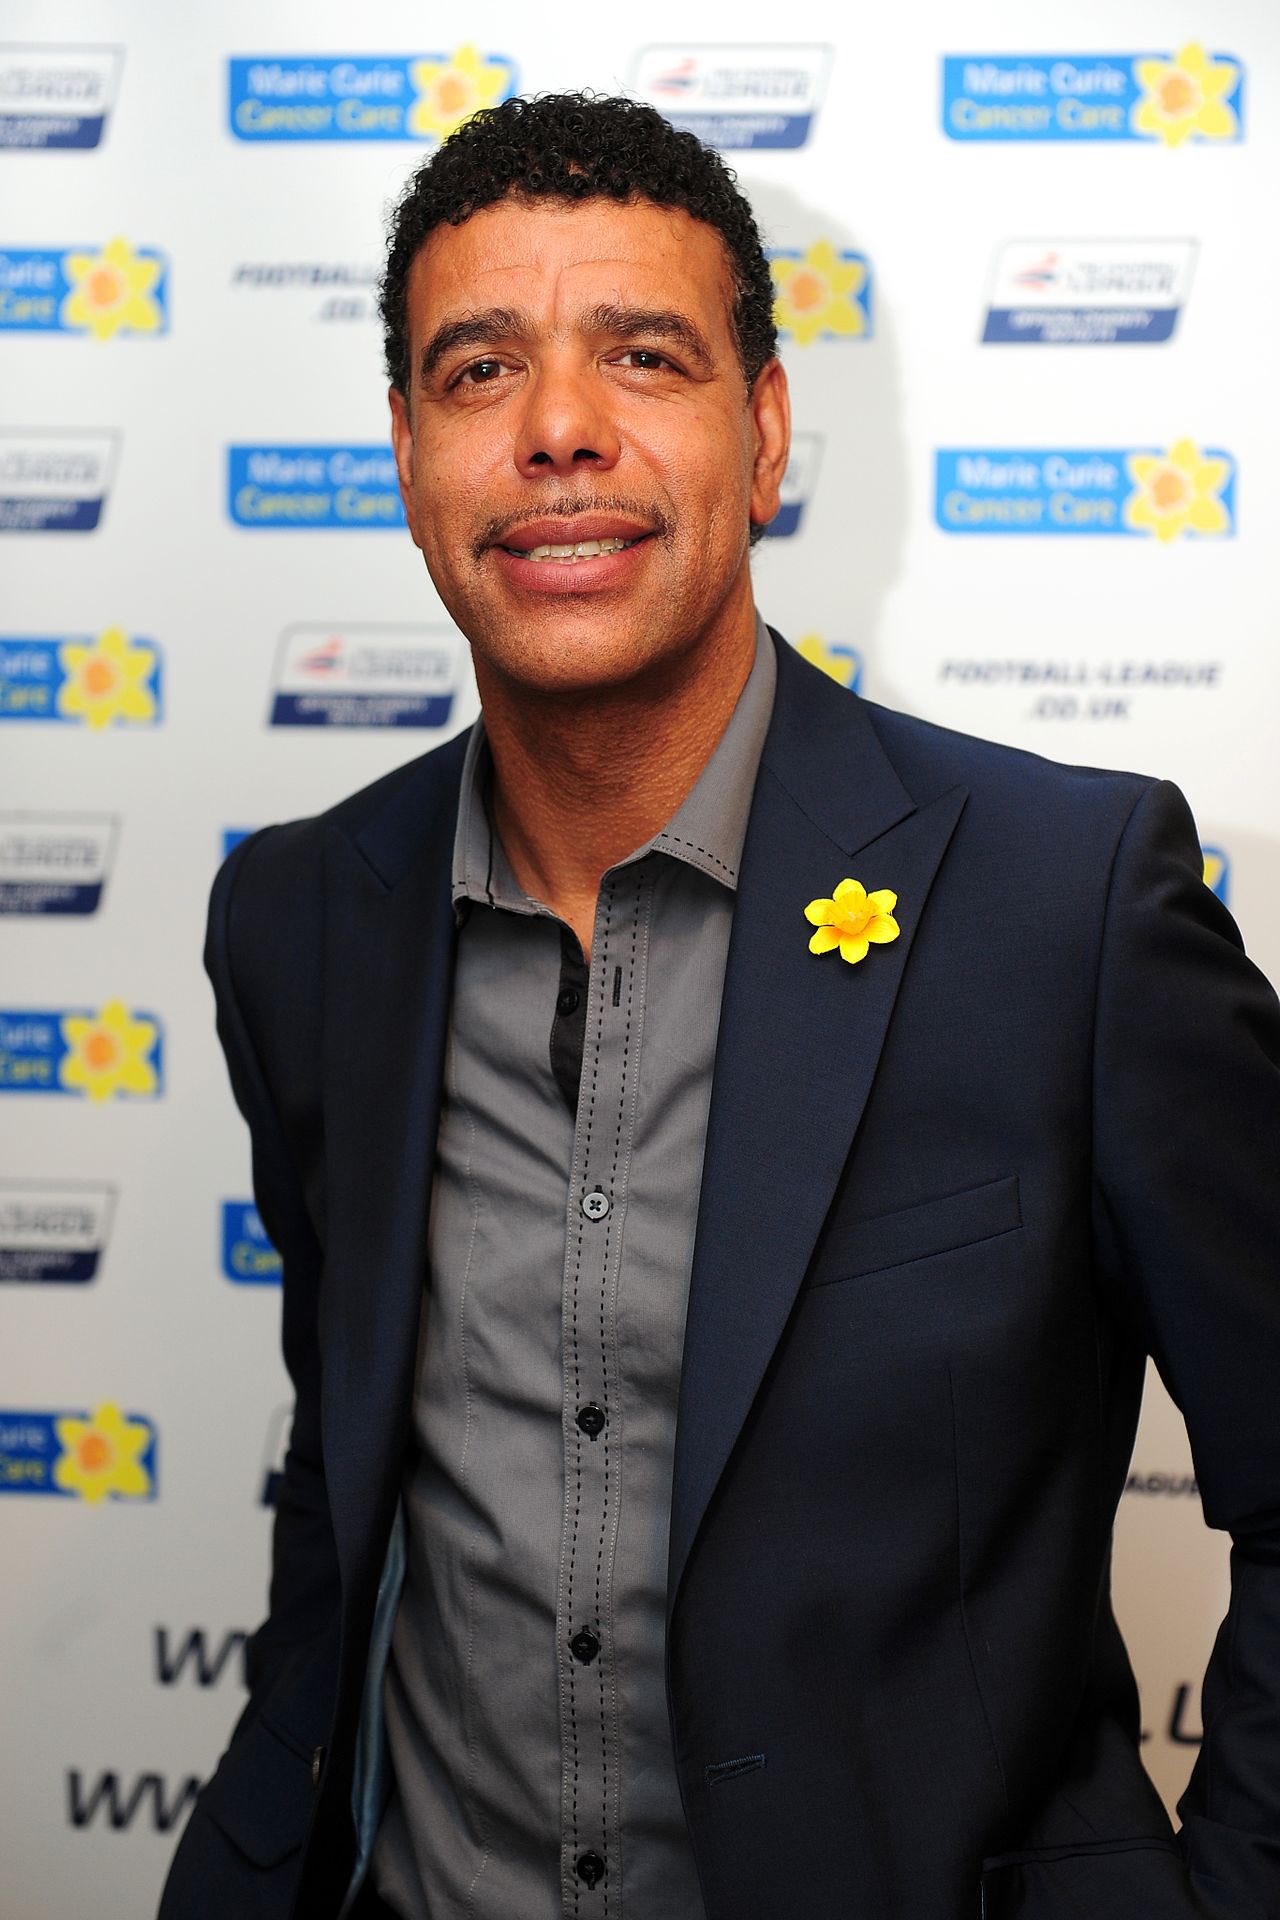 Happy 65th birthday to English former professional football player and manager, Chris Kamara. 